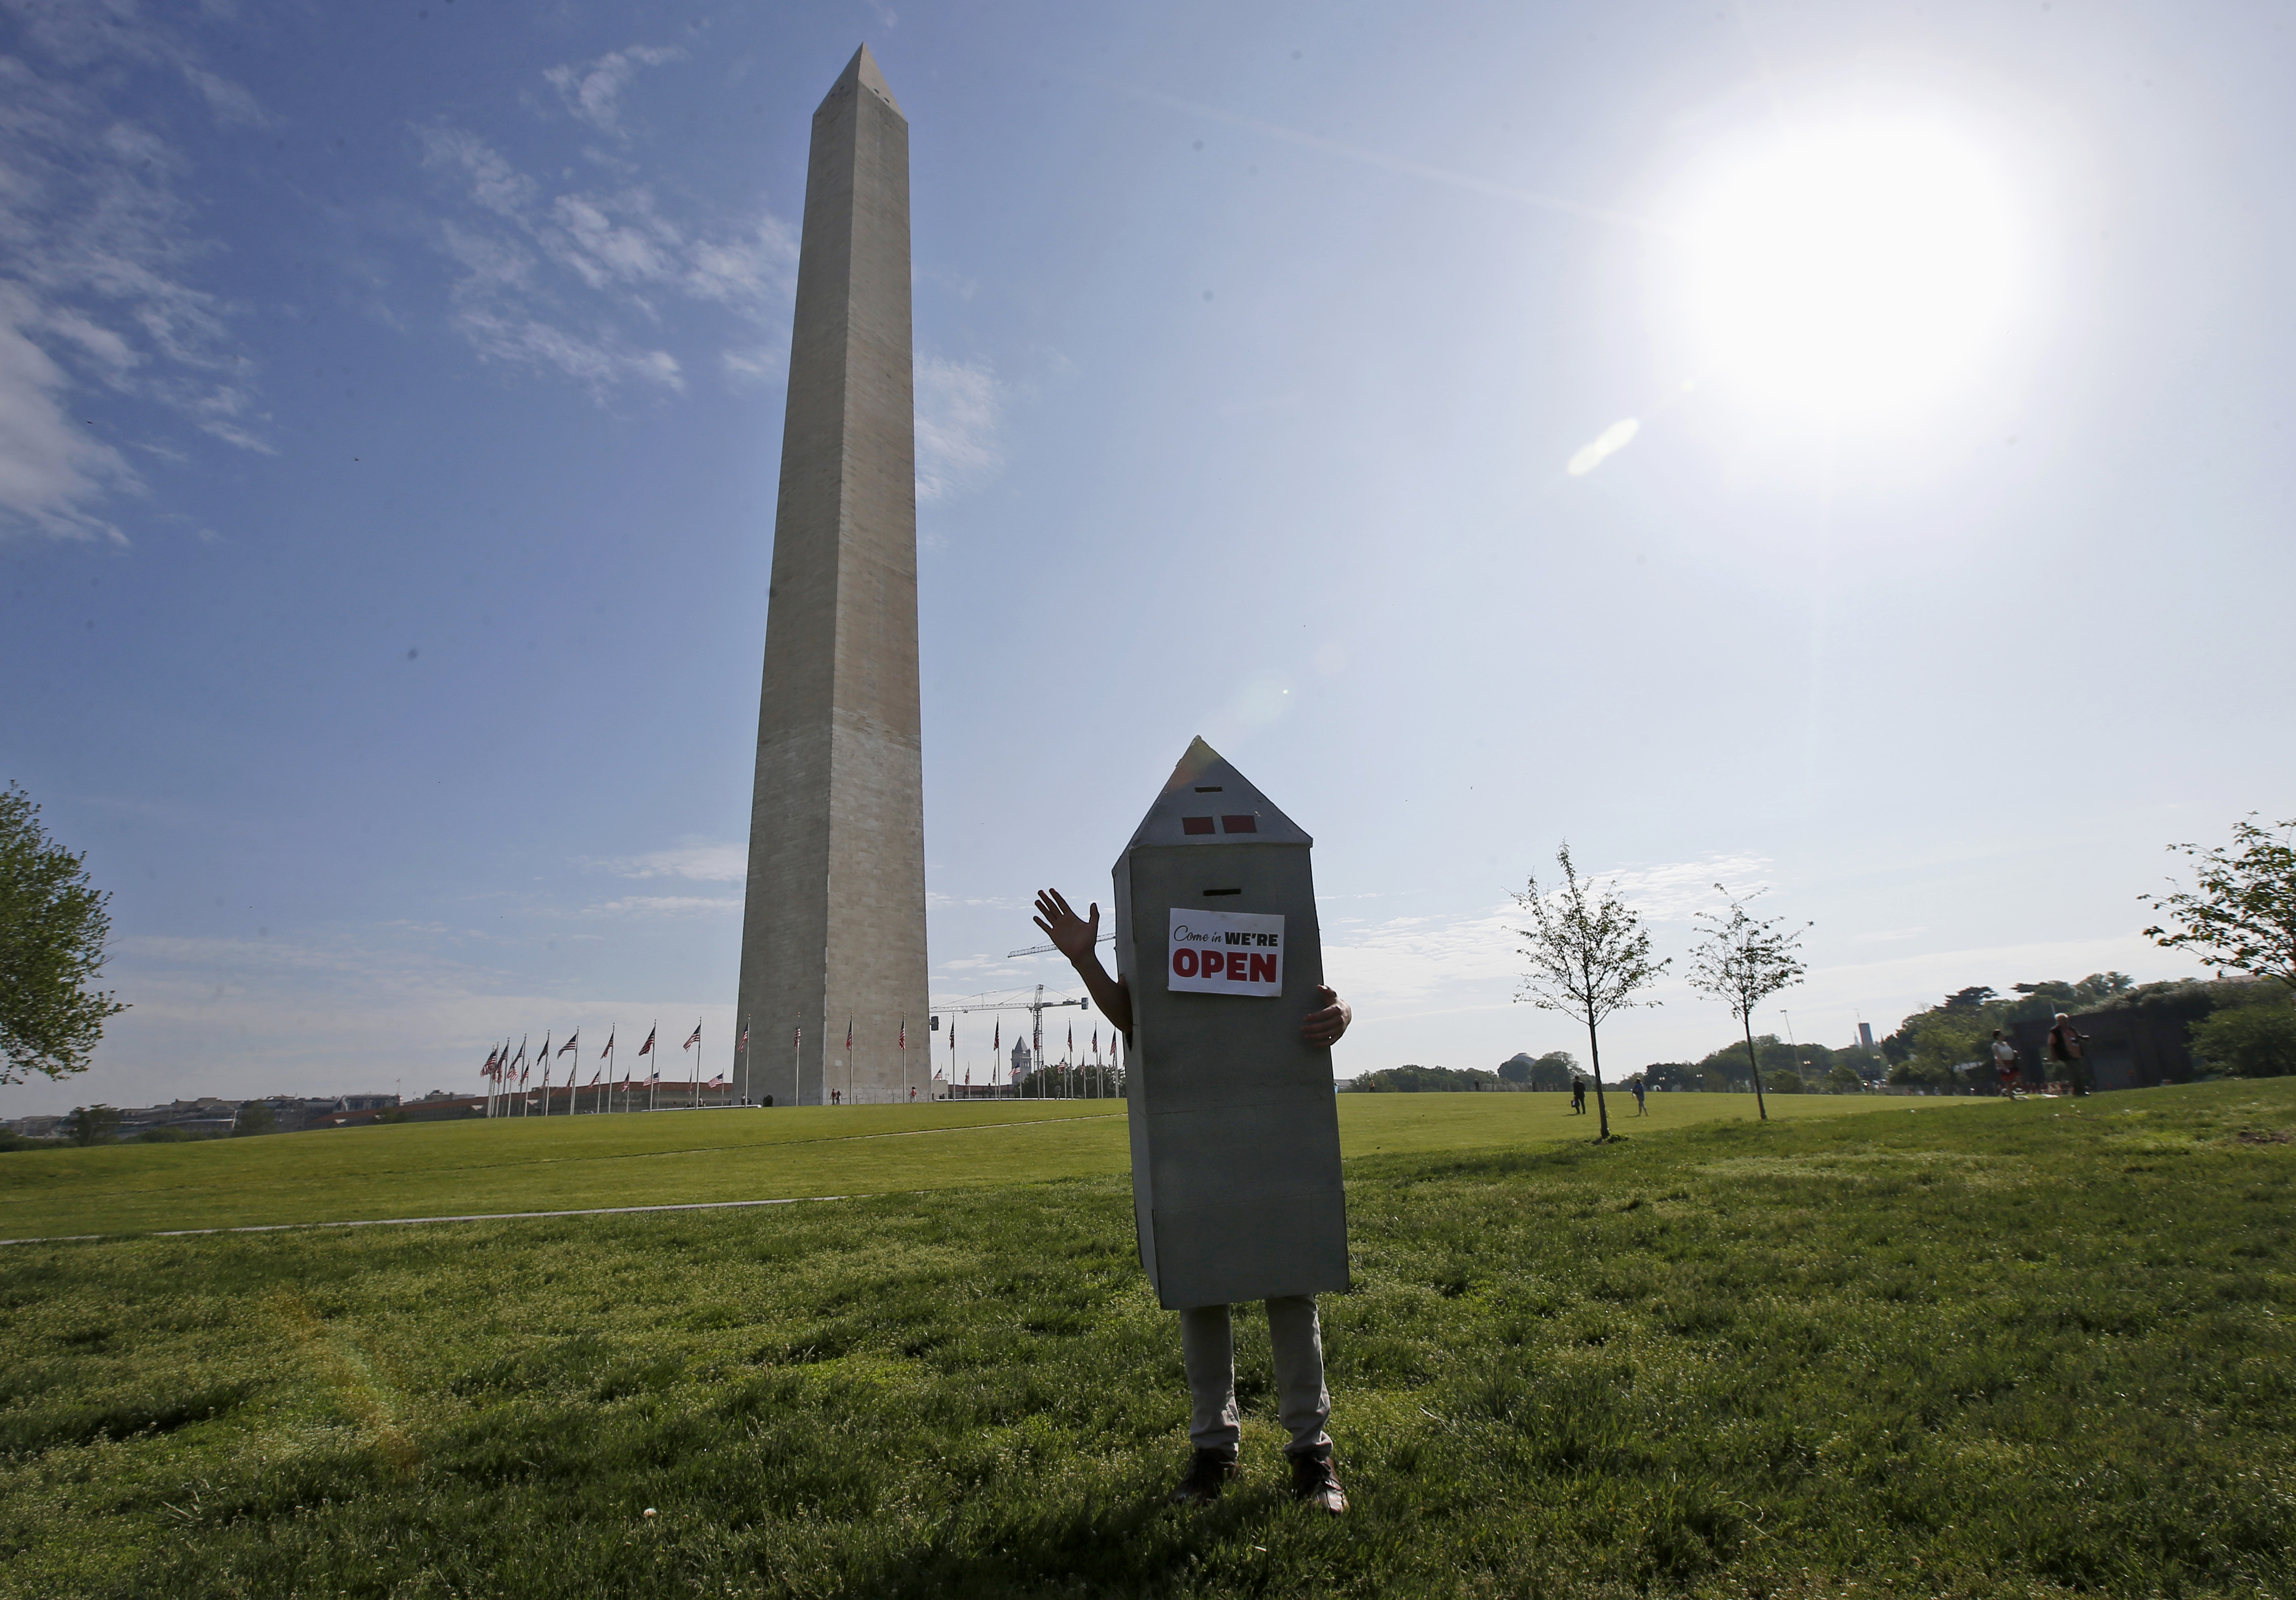 Washington Monument reopens after earthquake - Red Alert Politics